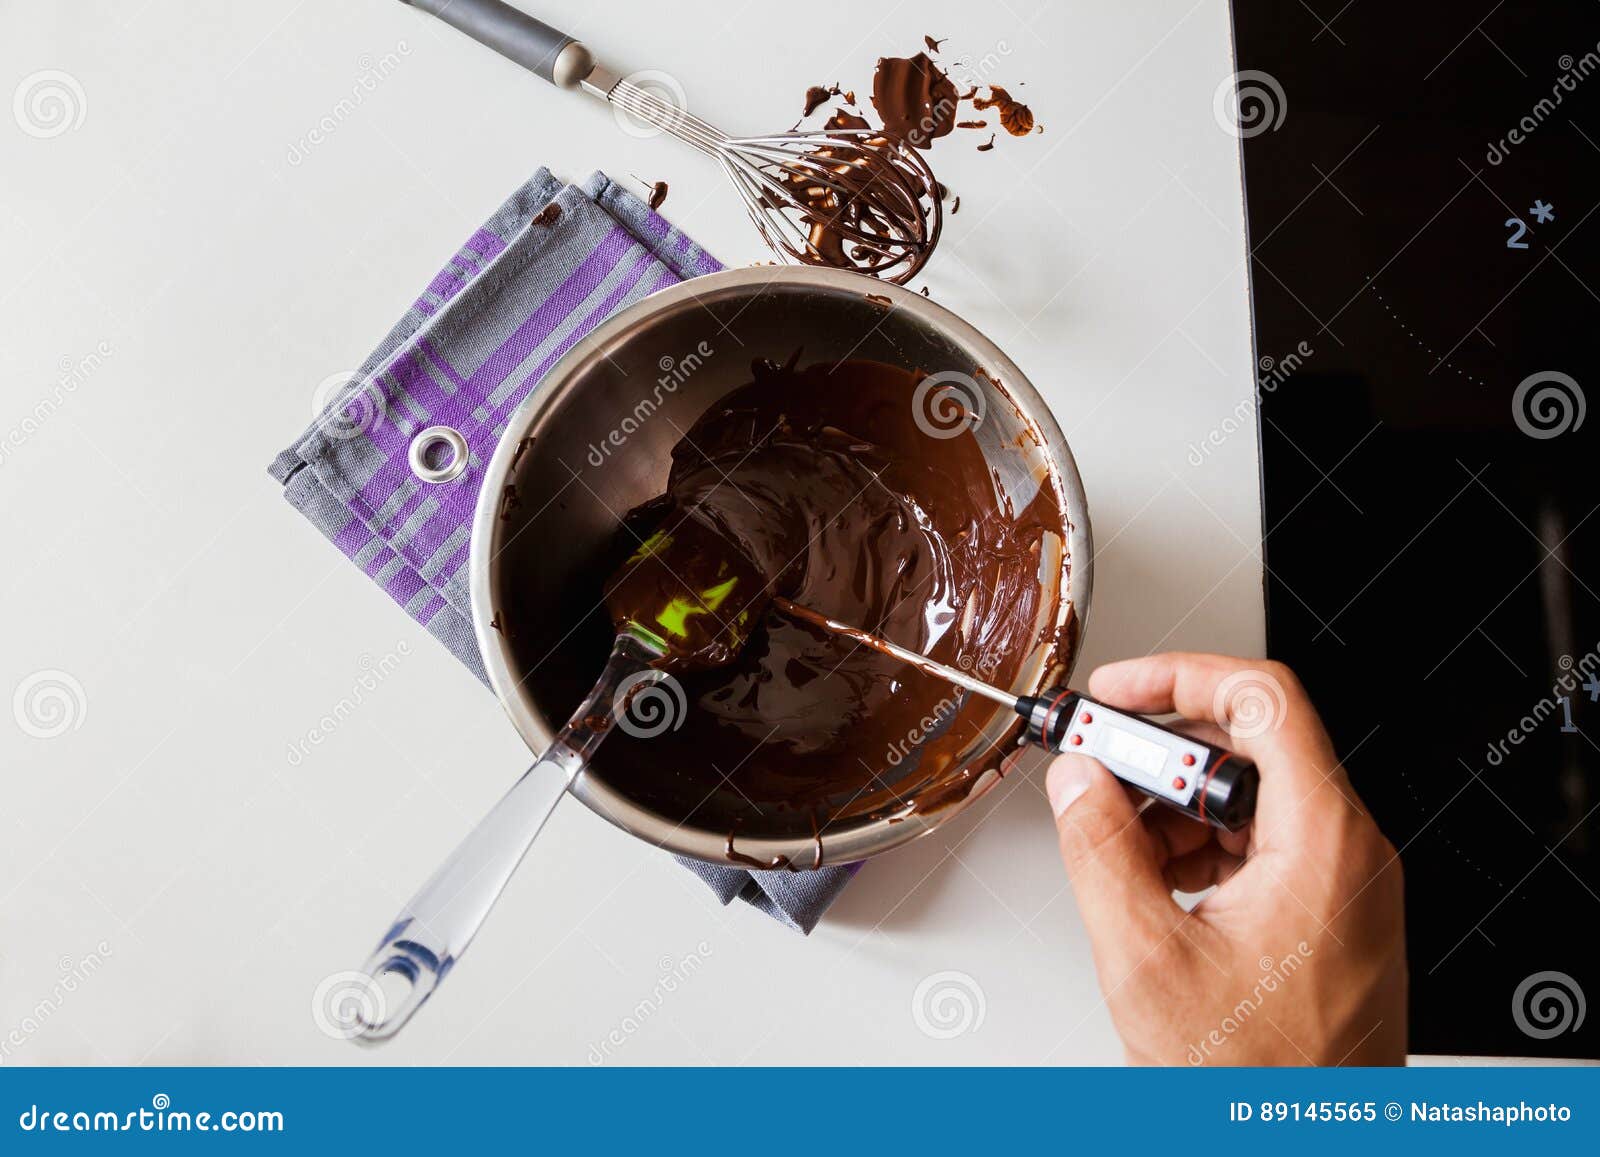 https://thumbs.dreamstime.com/z/temptating-chocolate-close-up-men-s-hand-holding-kitchen-thermometer-measuring-temperature-89145565.jpg